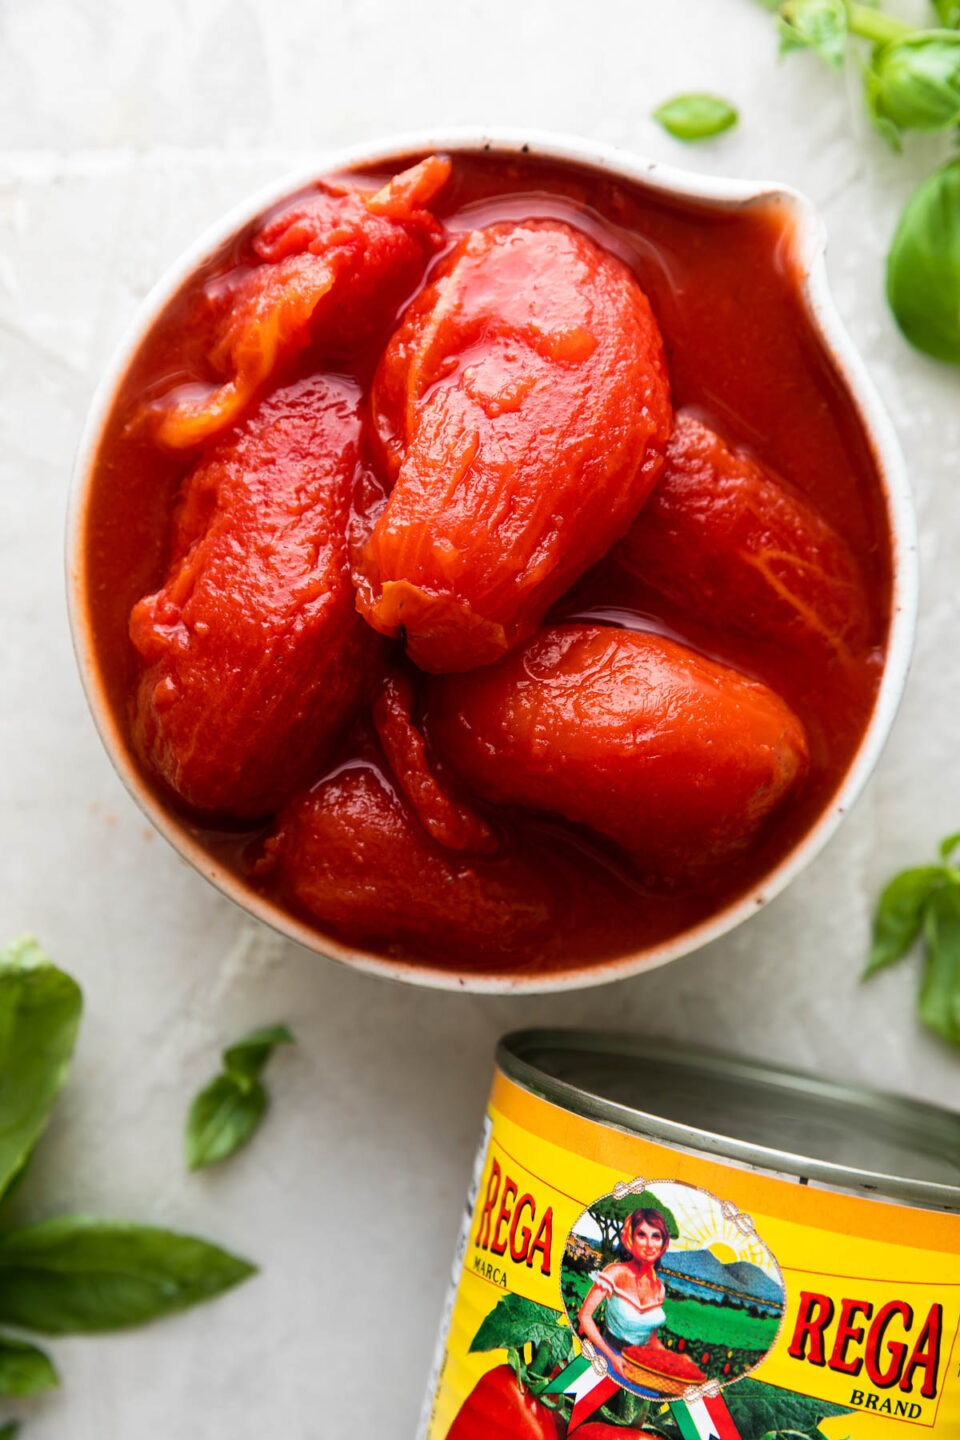 Whole peeled San Marzano tomatoes for a simple tomato sauce fill a small white ceramic bowl. The bowl sits atop a creamy white textured surface. A can of unopened San Marzano tomatoes rests alongside the bowl with the label facing upwards and loose fresh basil leaves surround the bowl.